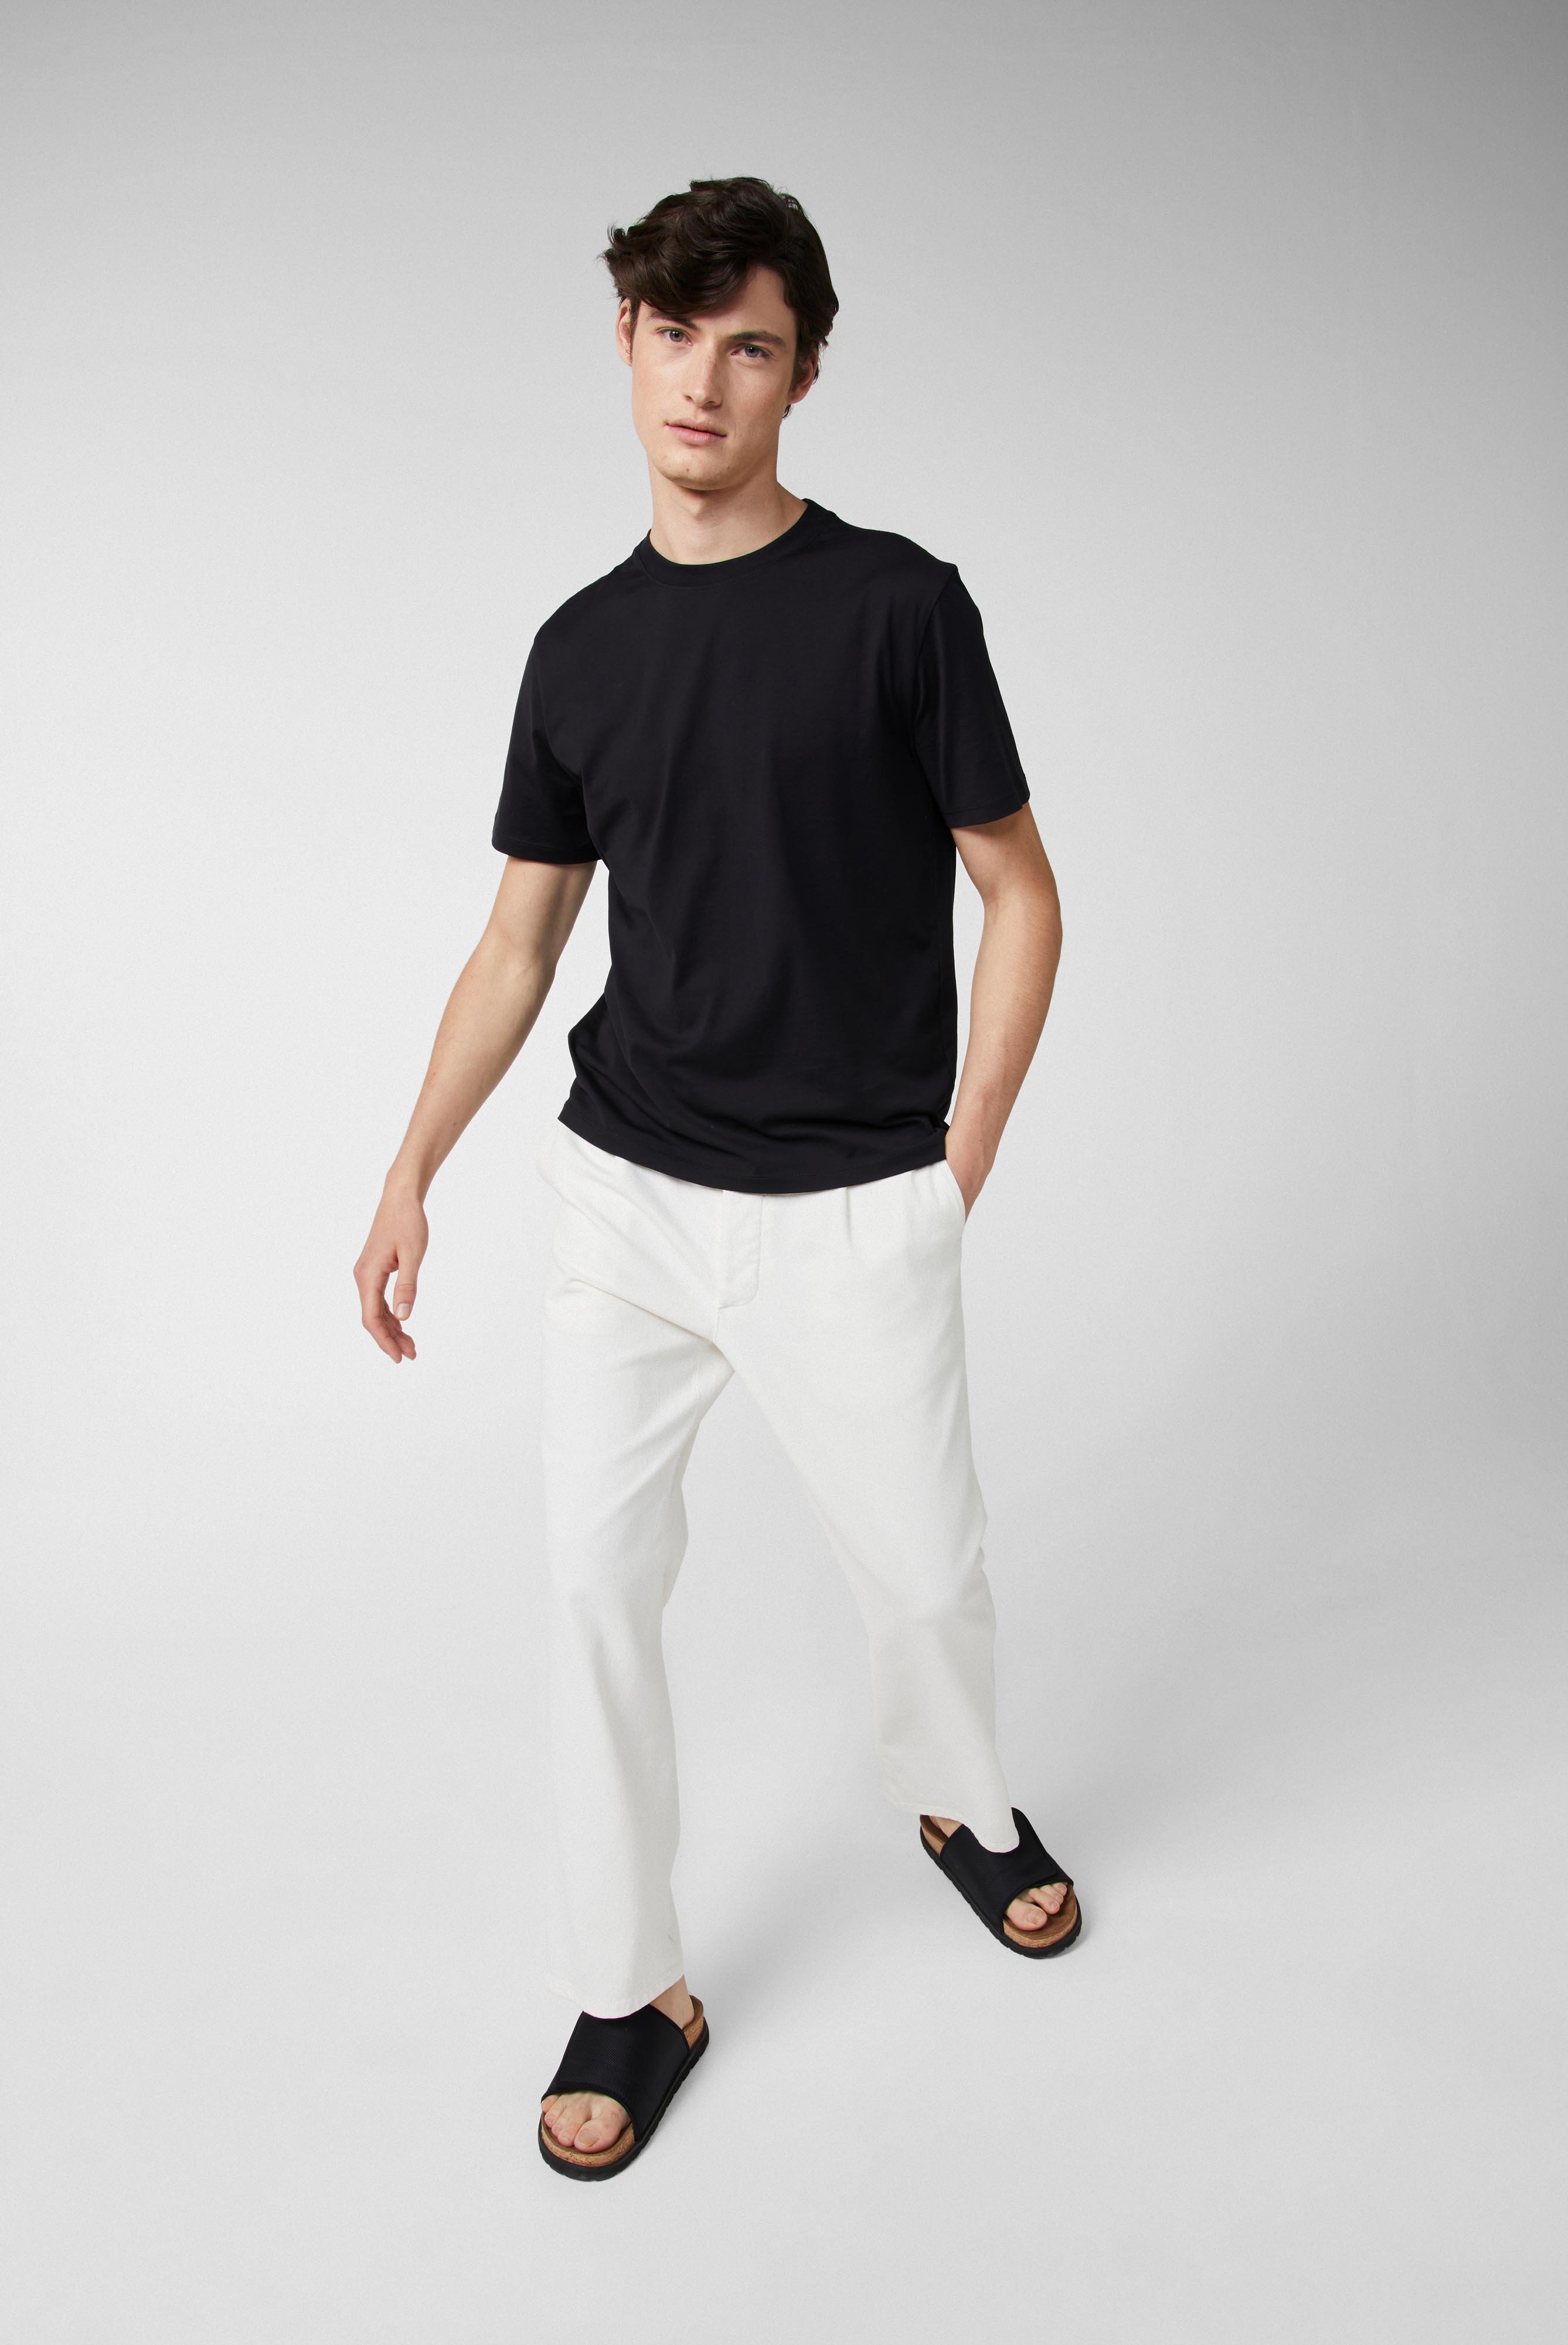 T-Shirts+Relaxed Fit Crew Neck Jersey T-Shirt+20.1660..Z20044.099.S